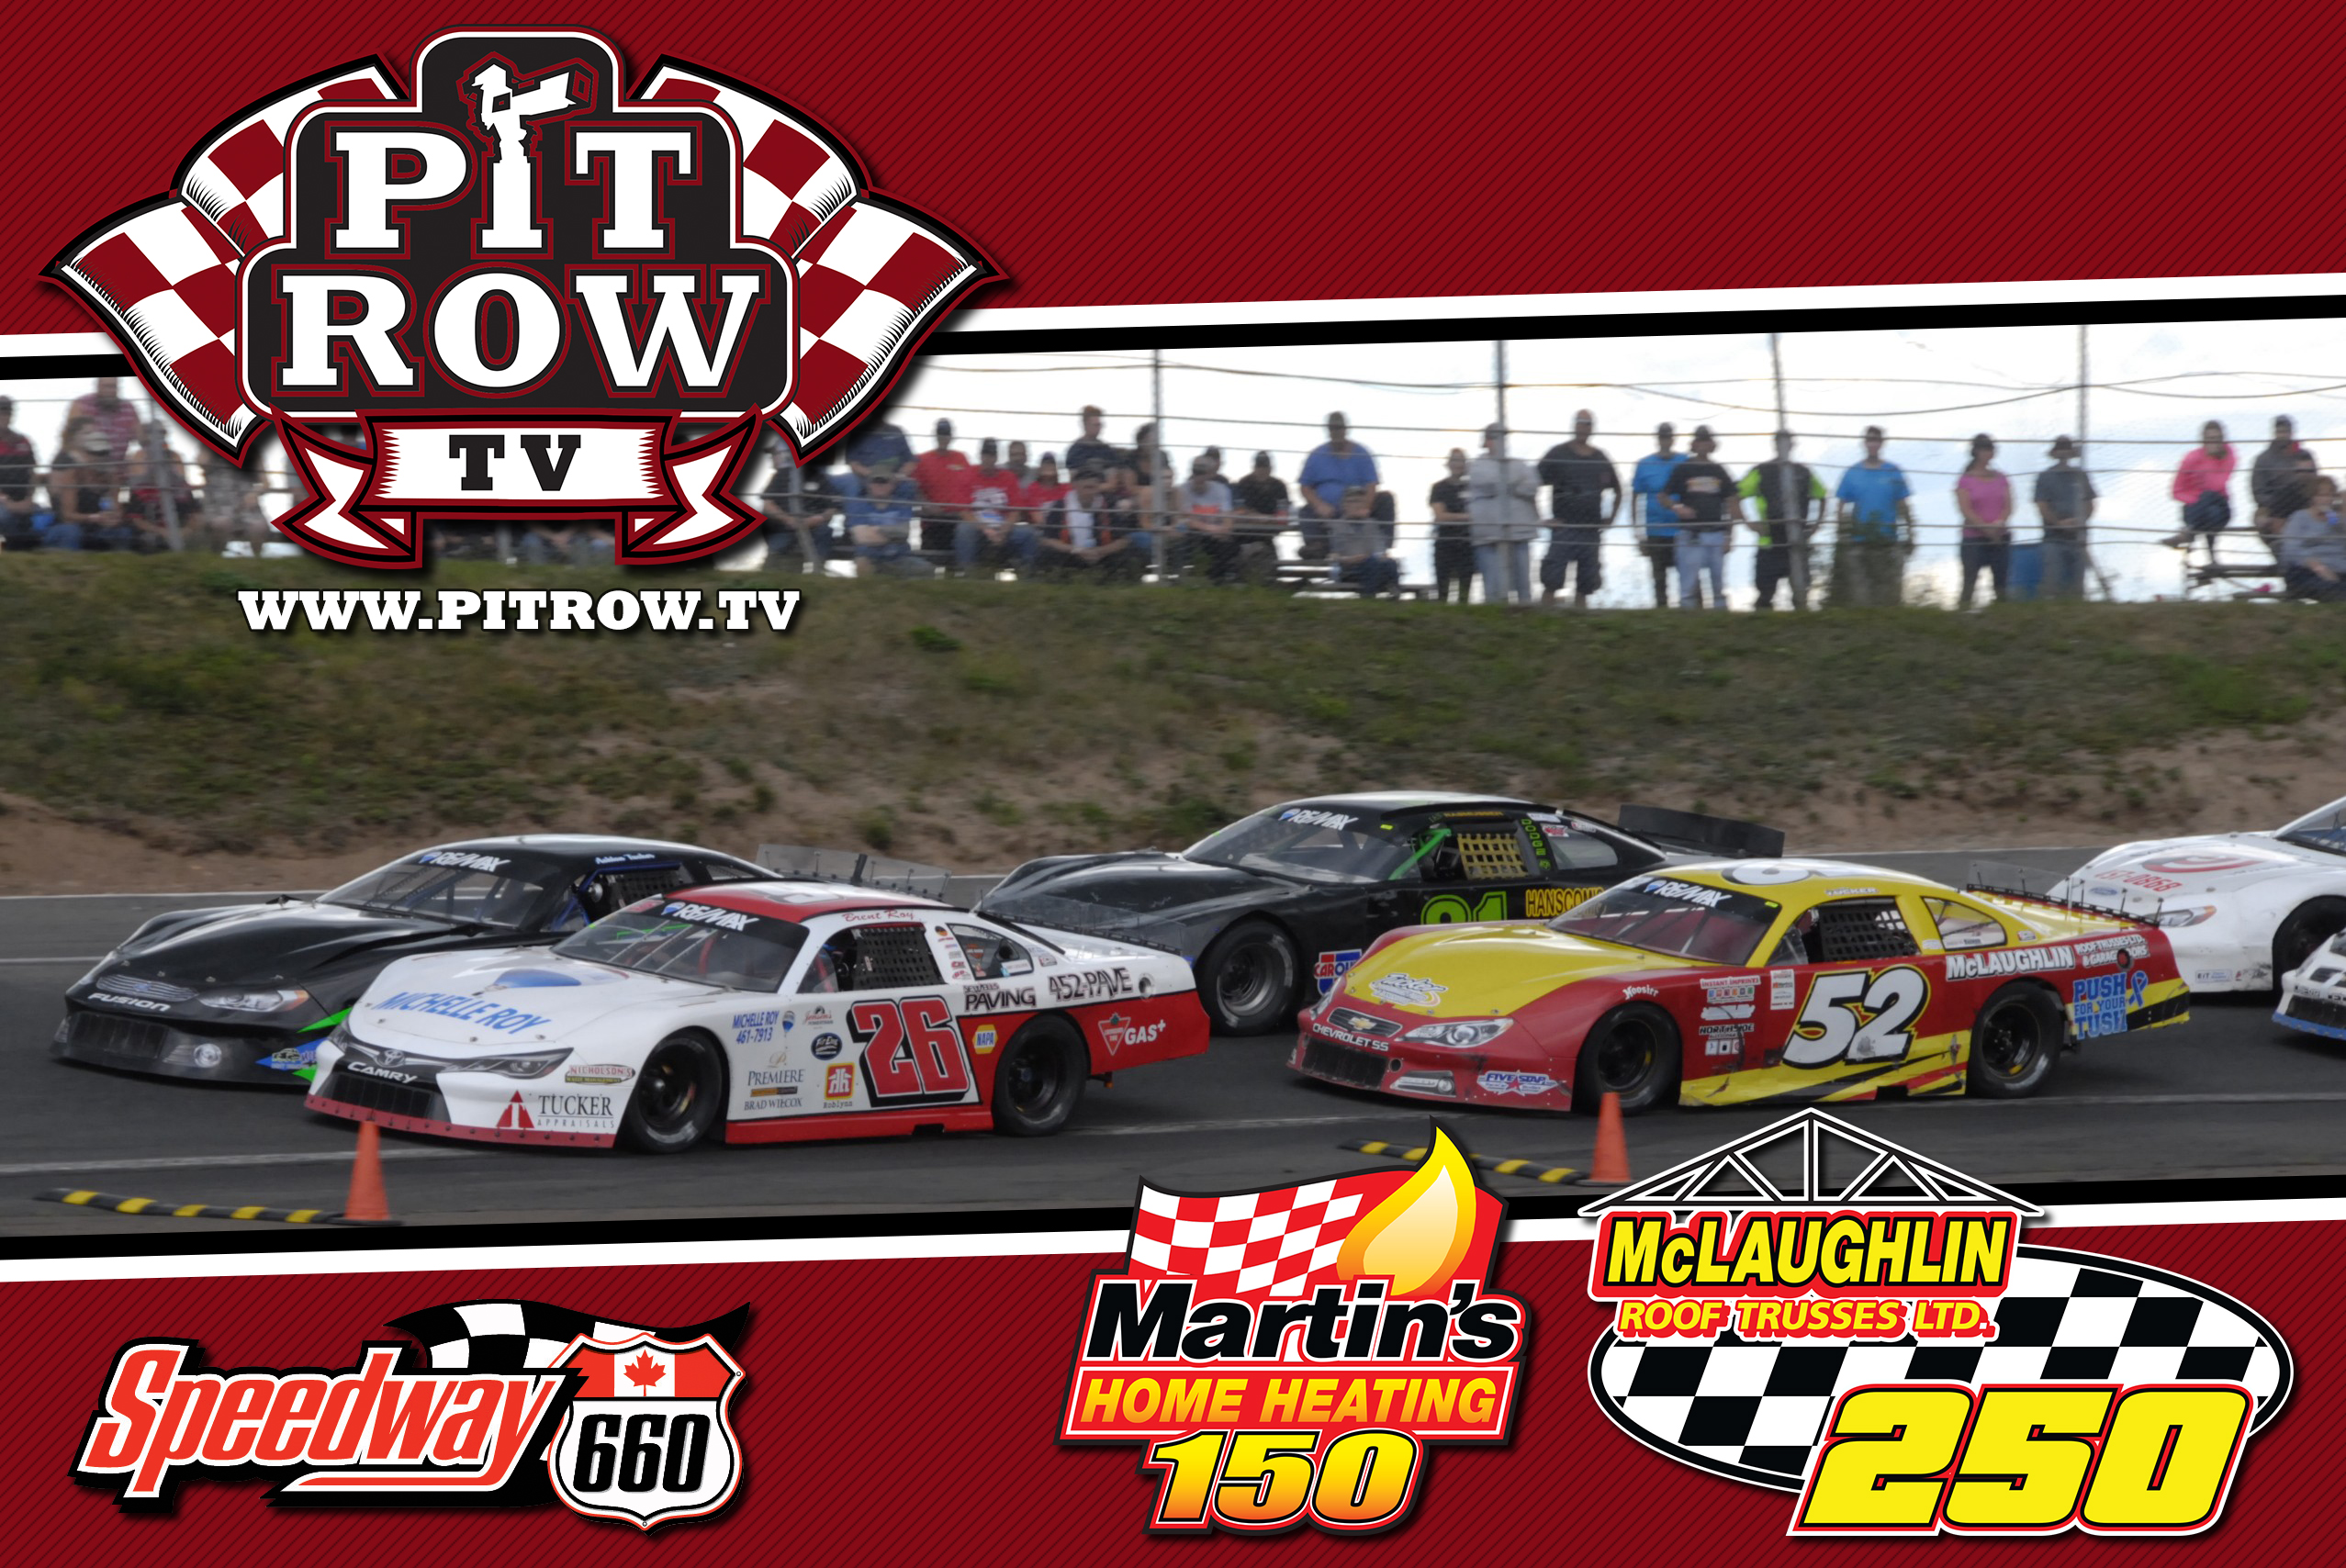 Atlantic Canada’s Richest Race Weekend Will Be Carried on LIVE Worldwide VIDEO Broadcast from Speedway 660